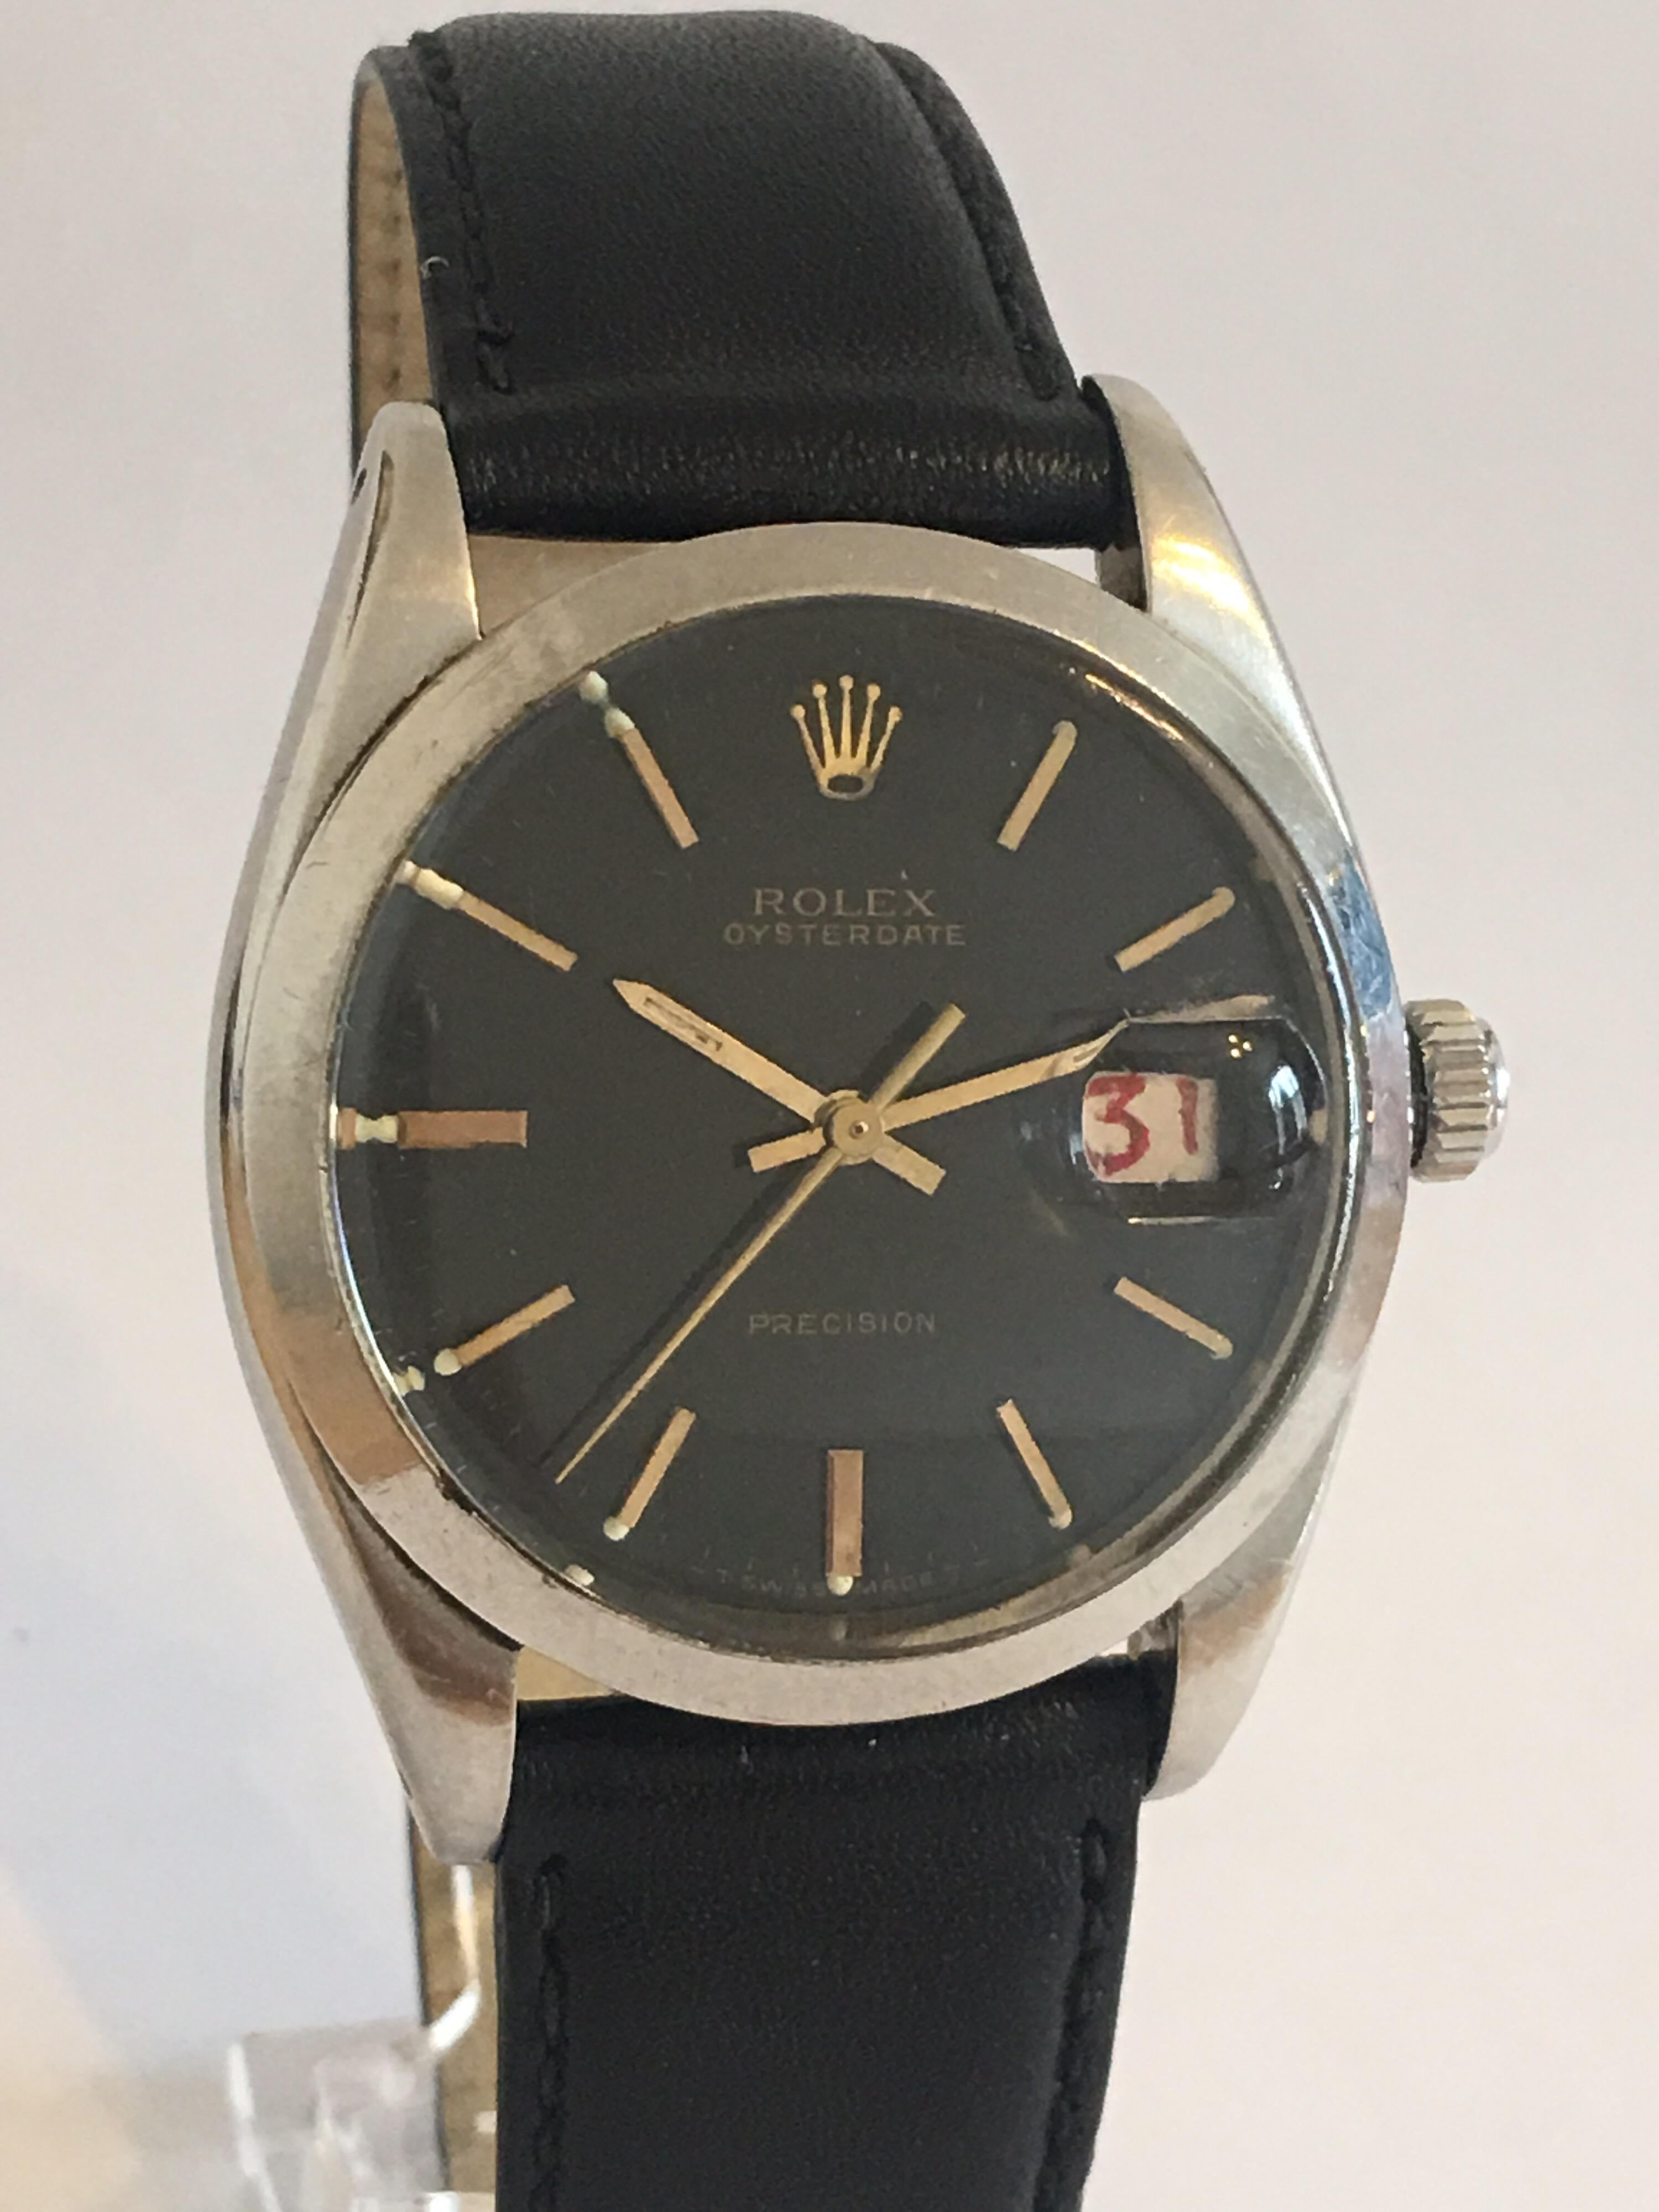 Vintage 1960s Rolex Oyster Date Precision 46561 2